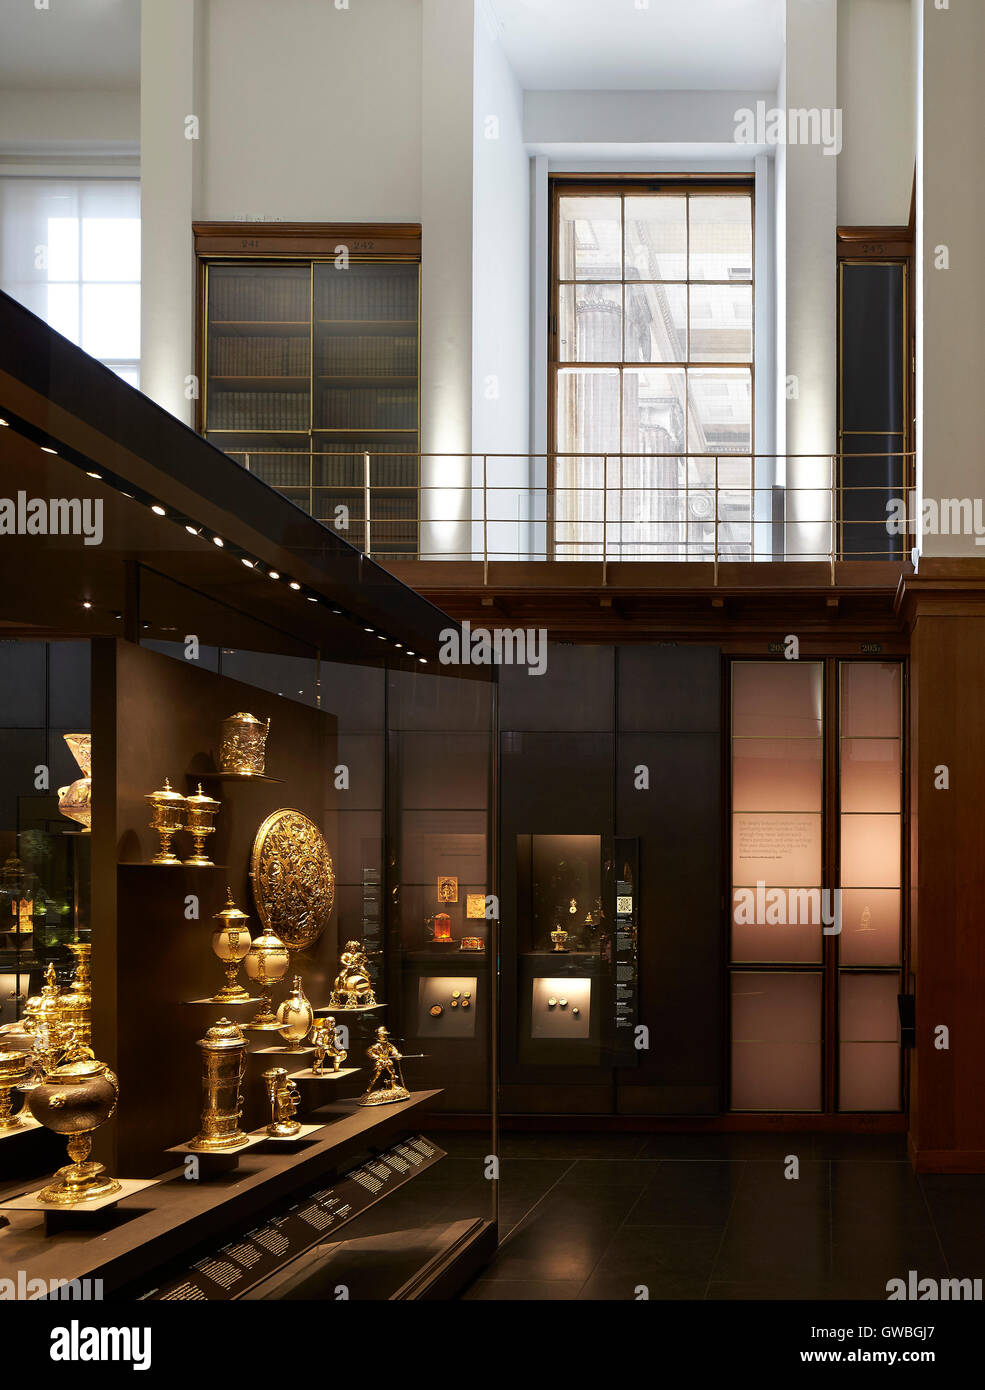 View along showcases within double-height gallery. Waddesdon Bequest Gallery at the British Museum, London, United Kingdom. Architect: Stanton Williams, 2015. Stock Photo